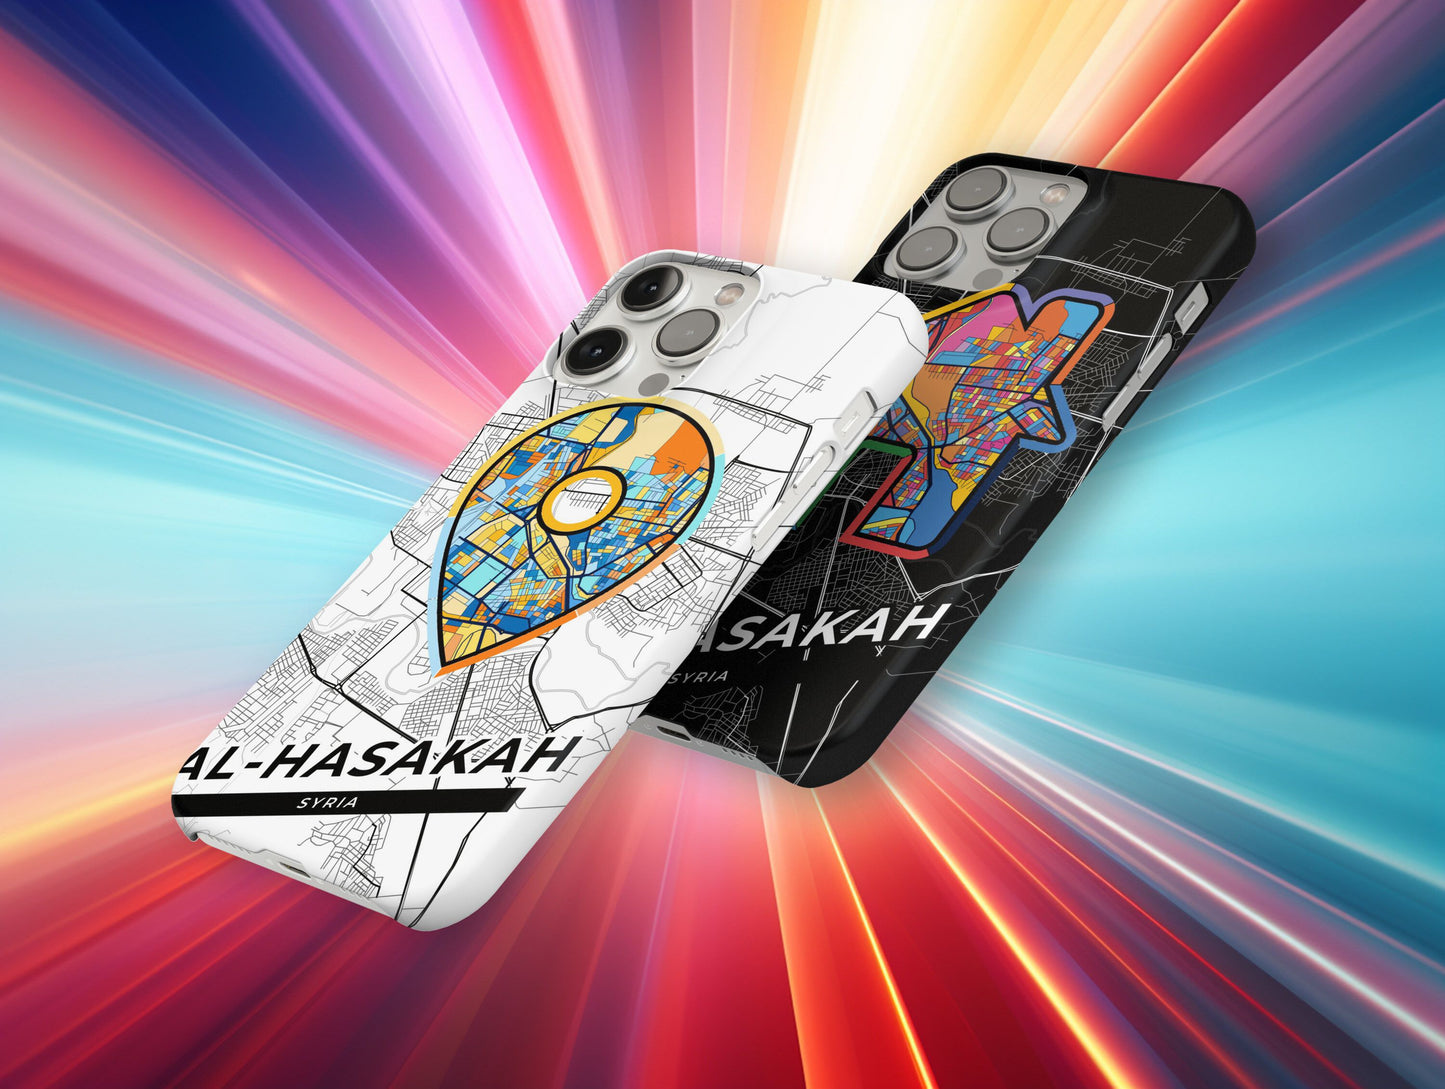 Al-Hasakah Syria slim phone case with colorful icon. Birthday, wedding or housewarming gift. Couple match cases.